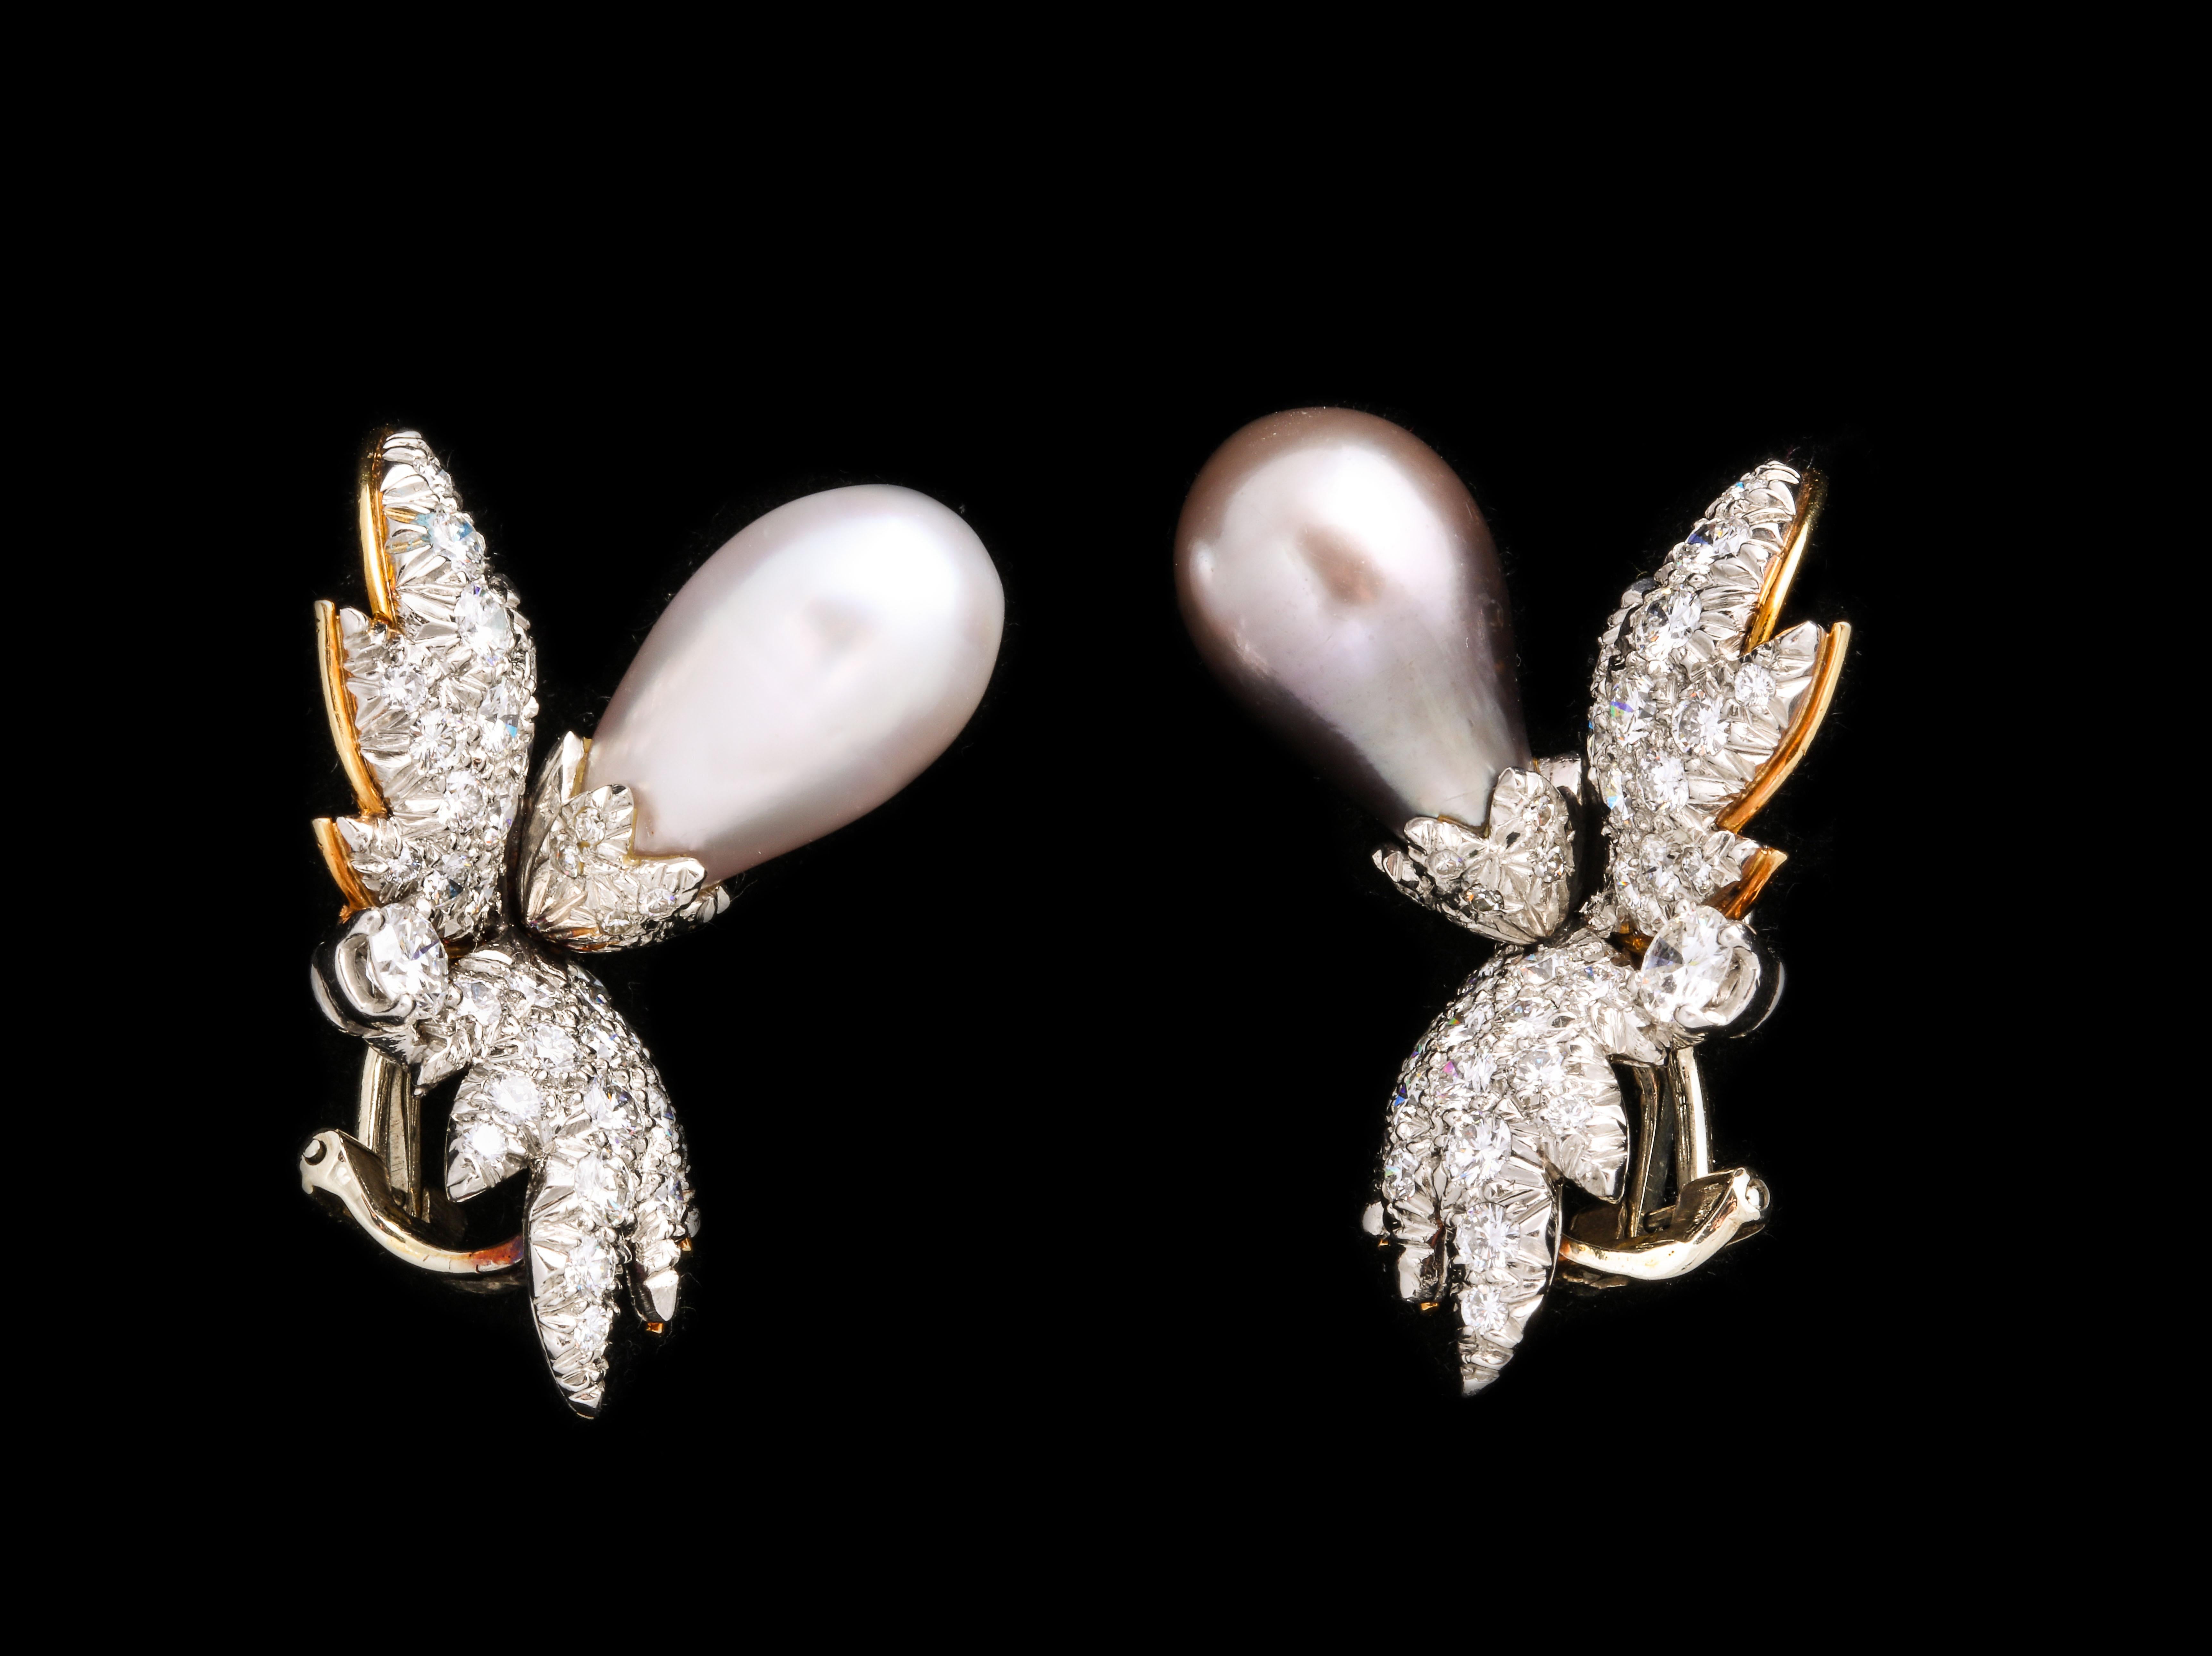 Tiifany by Shlumberger Natrual Pearl Earrings

1.2 inches long